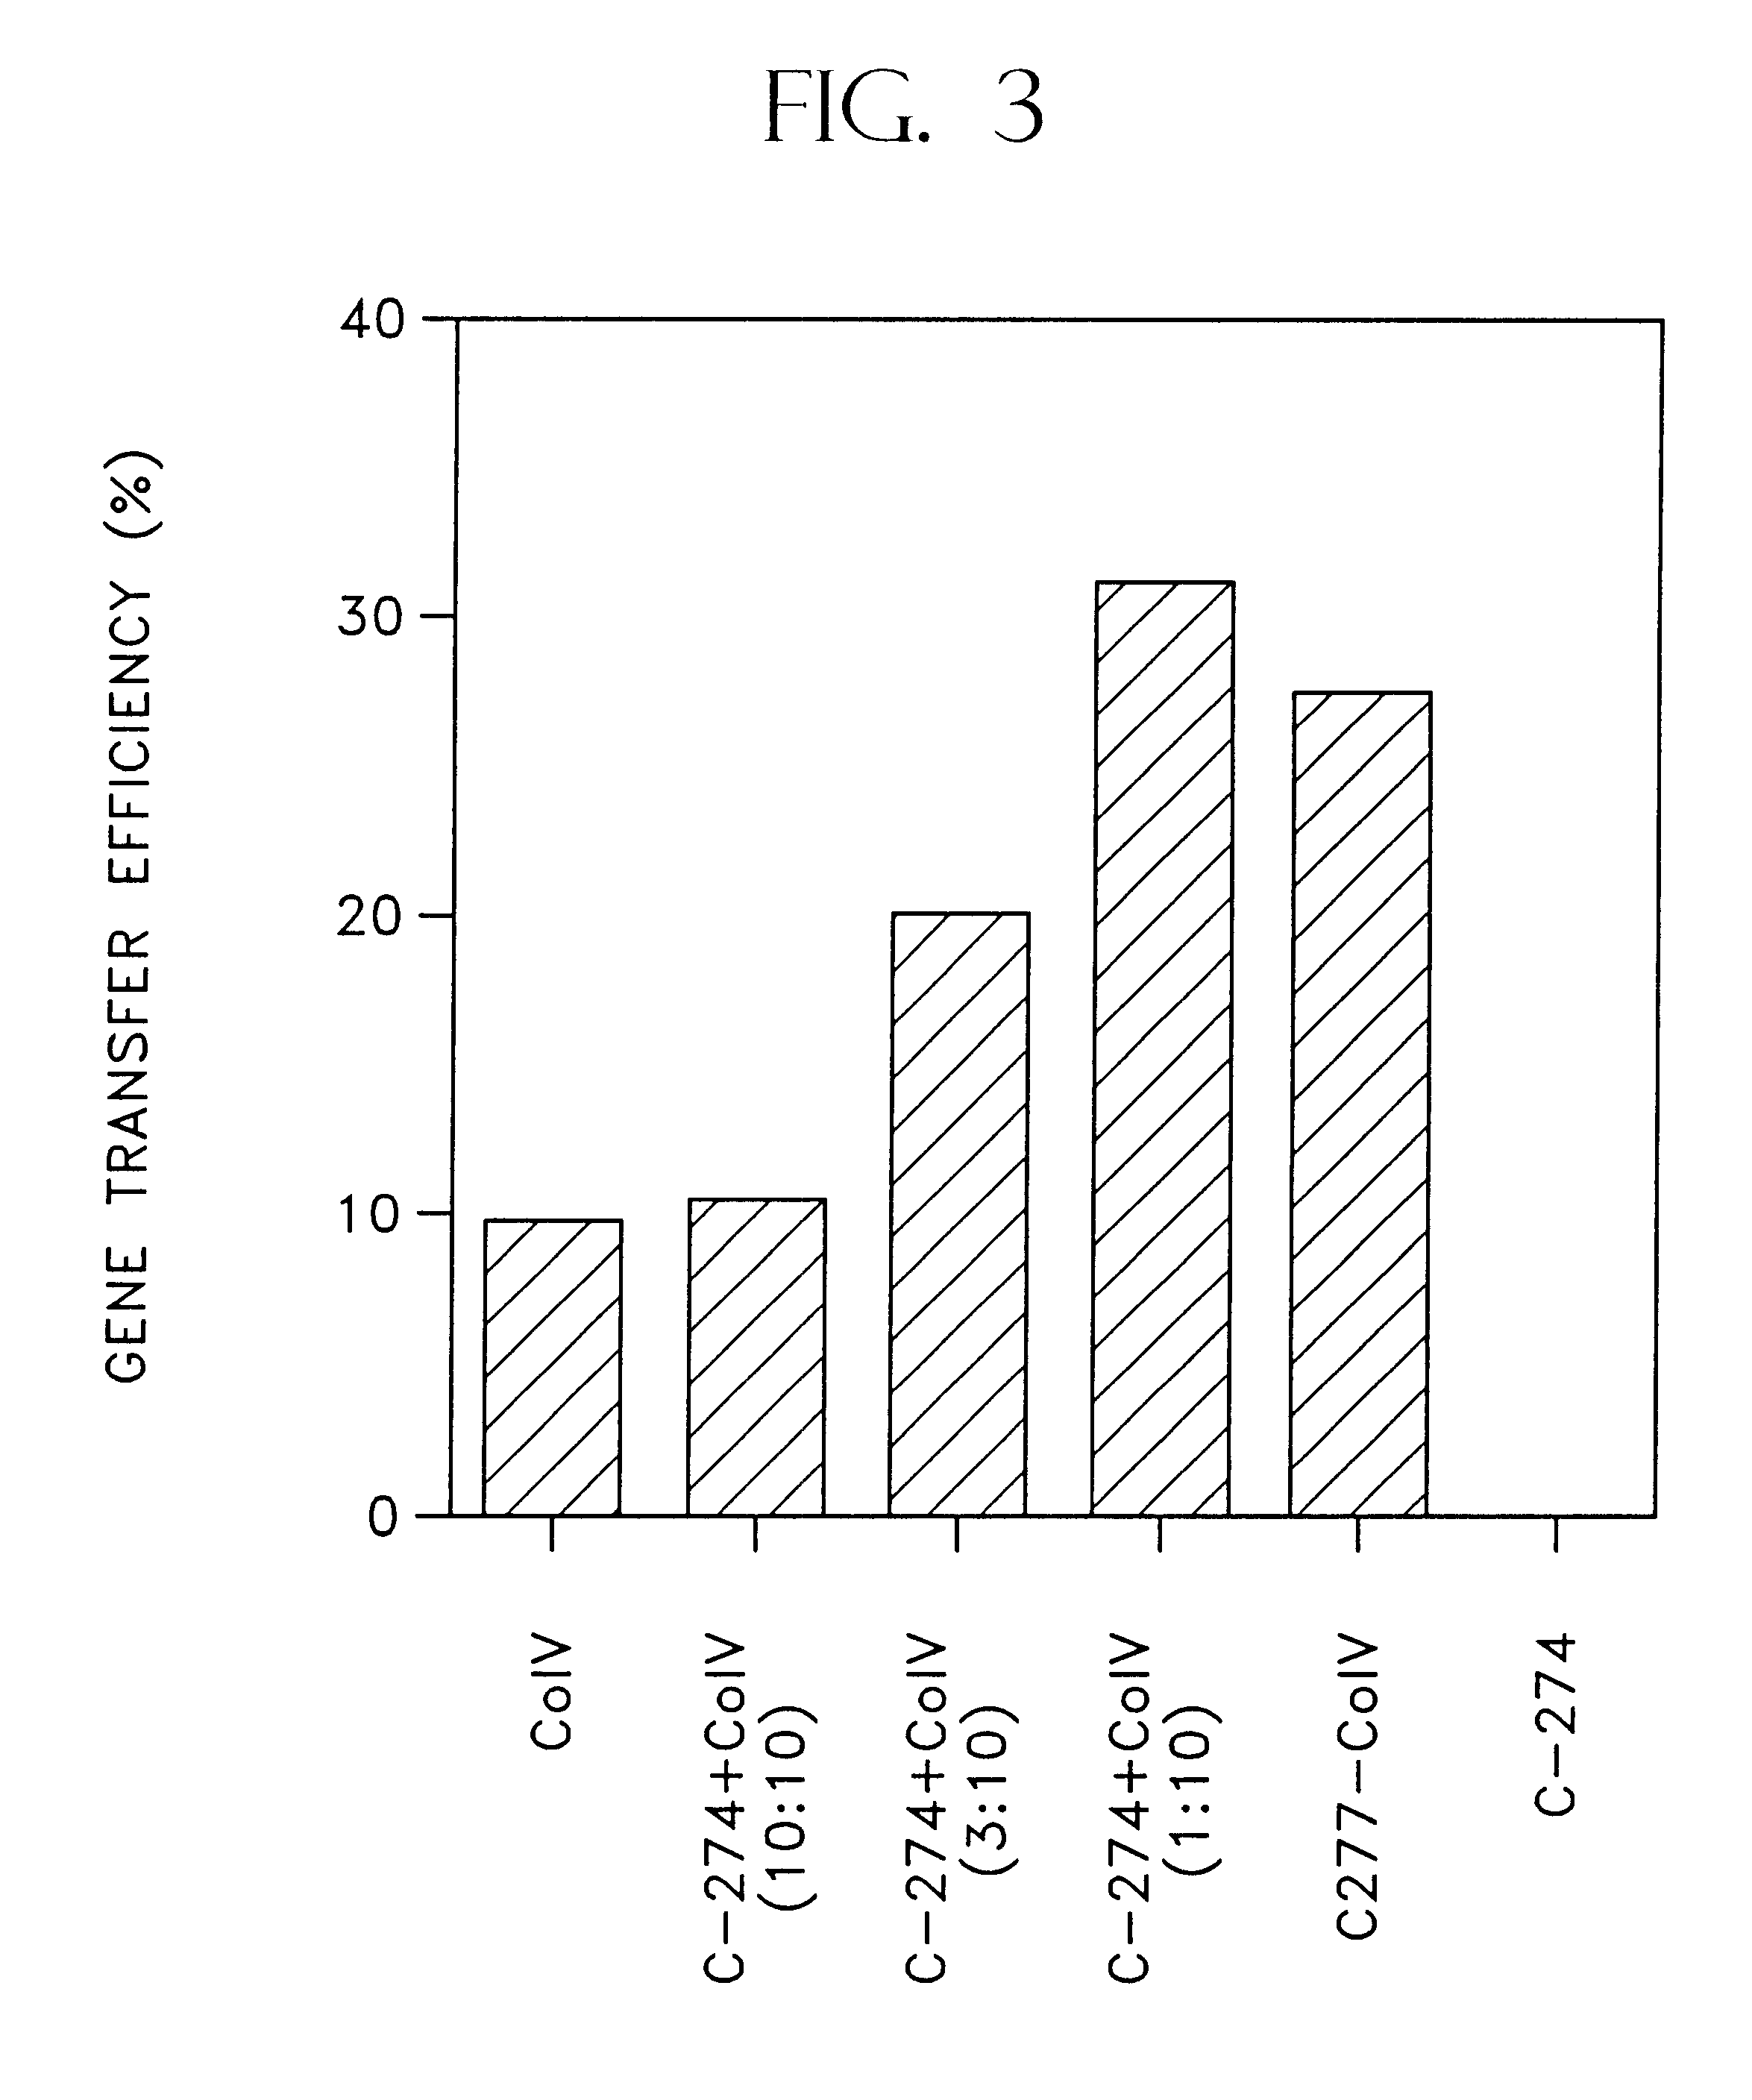 Methods for retroviral mediated gene transfer employing molecules, or mixtures thereof, containing retroviral binding domains and target cell binding domains